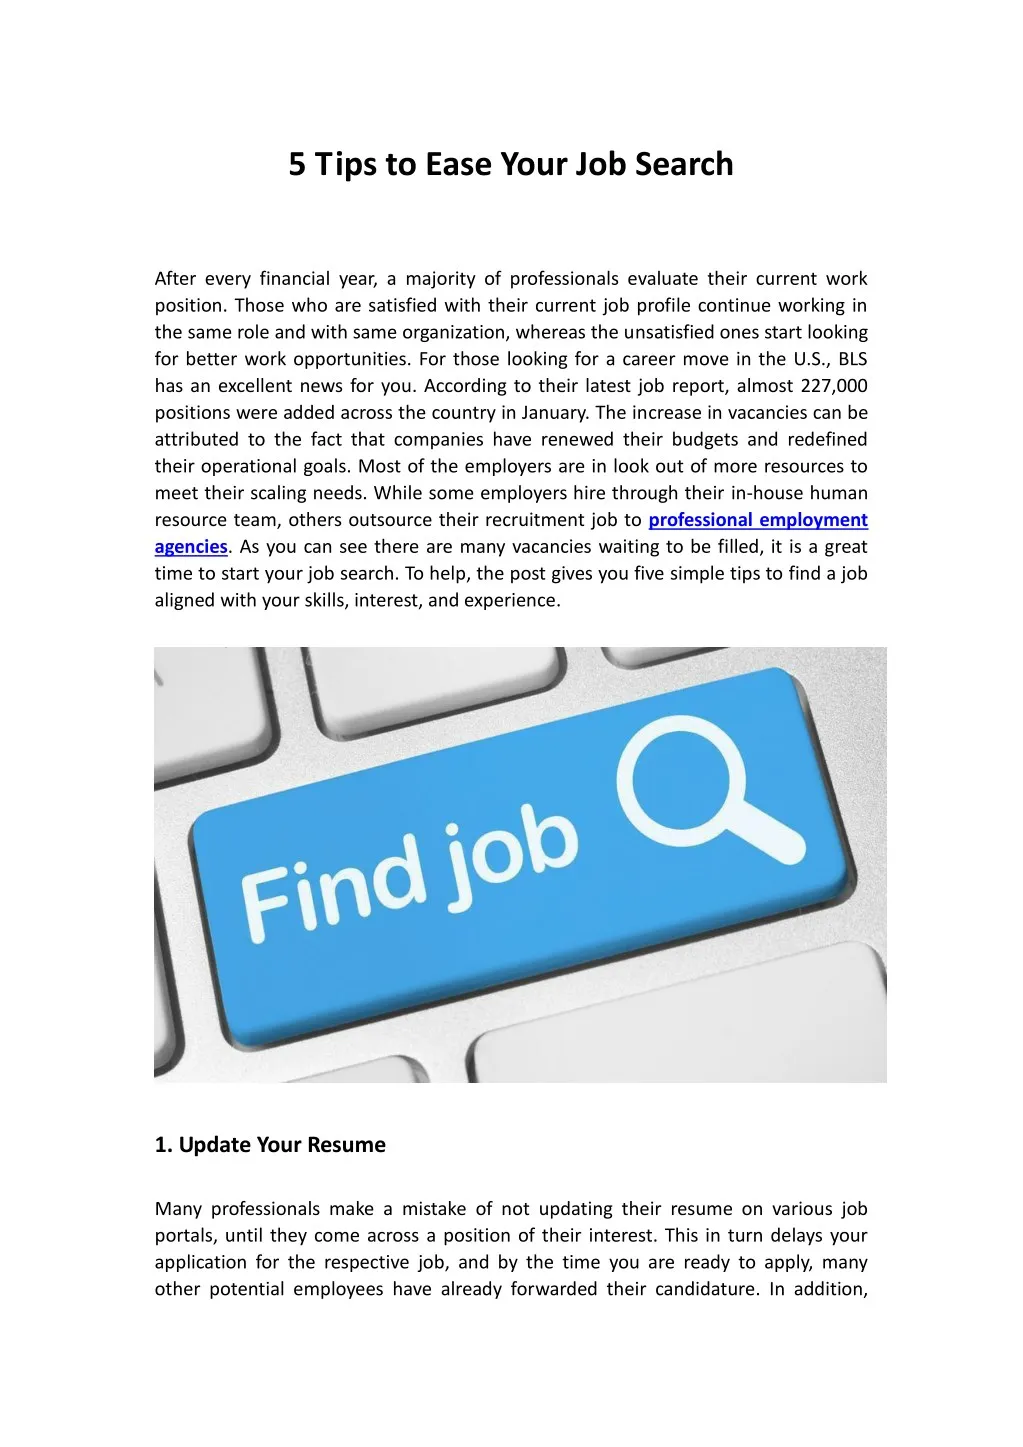 5 tips to ease your job search